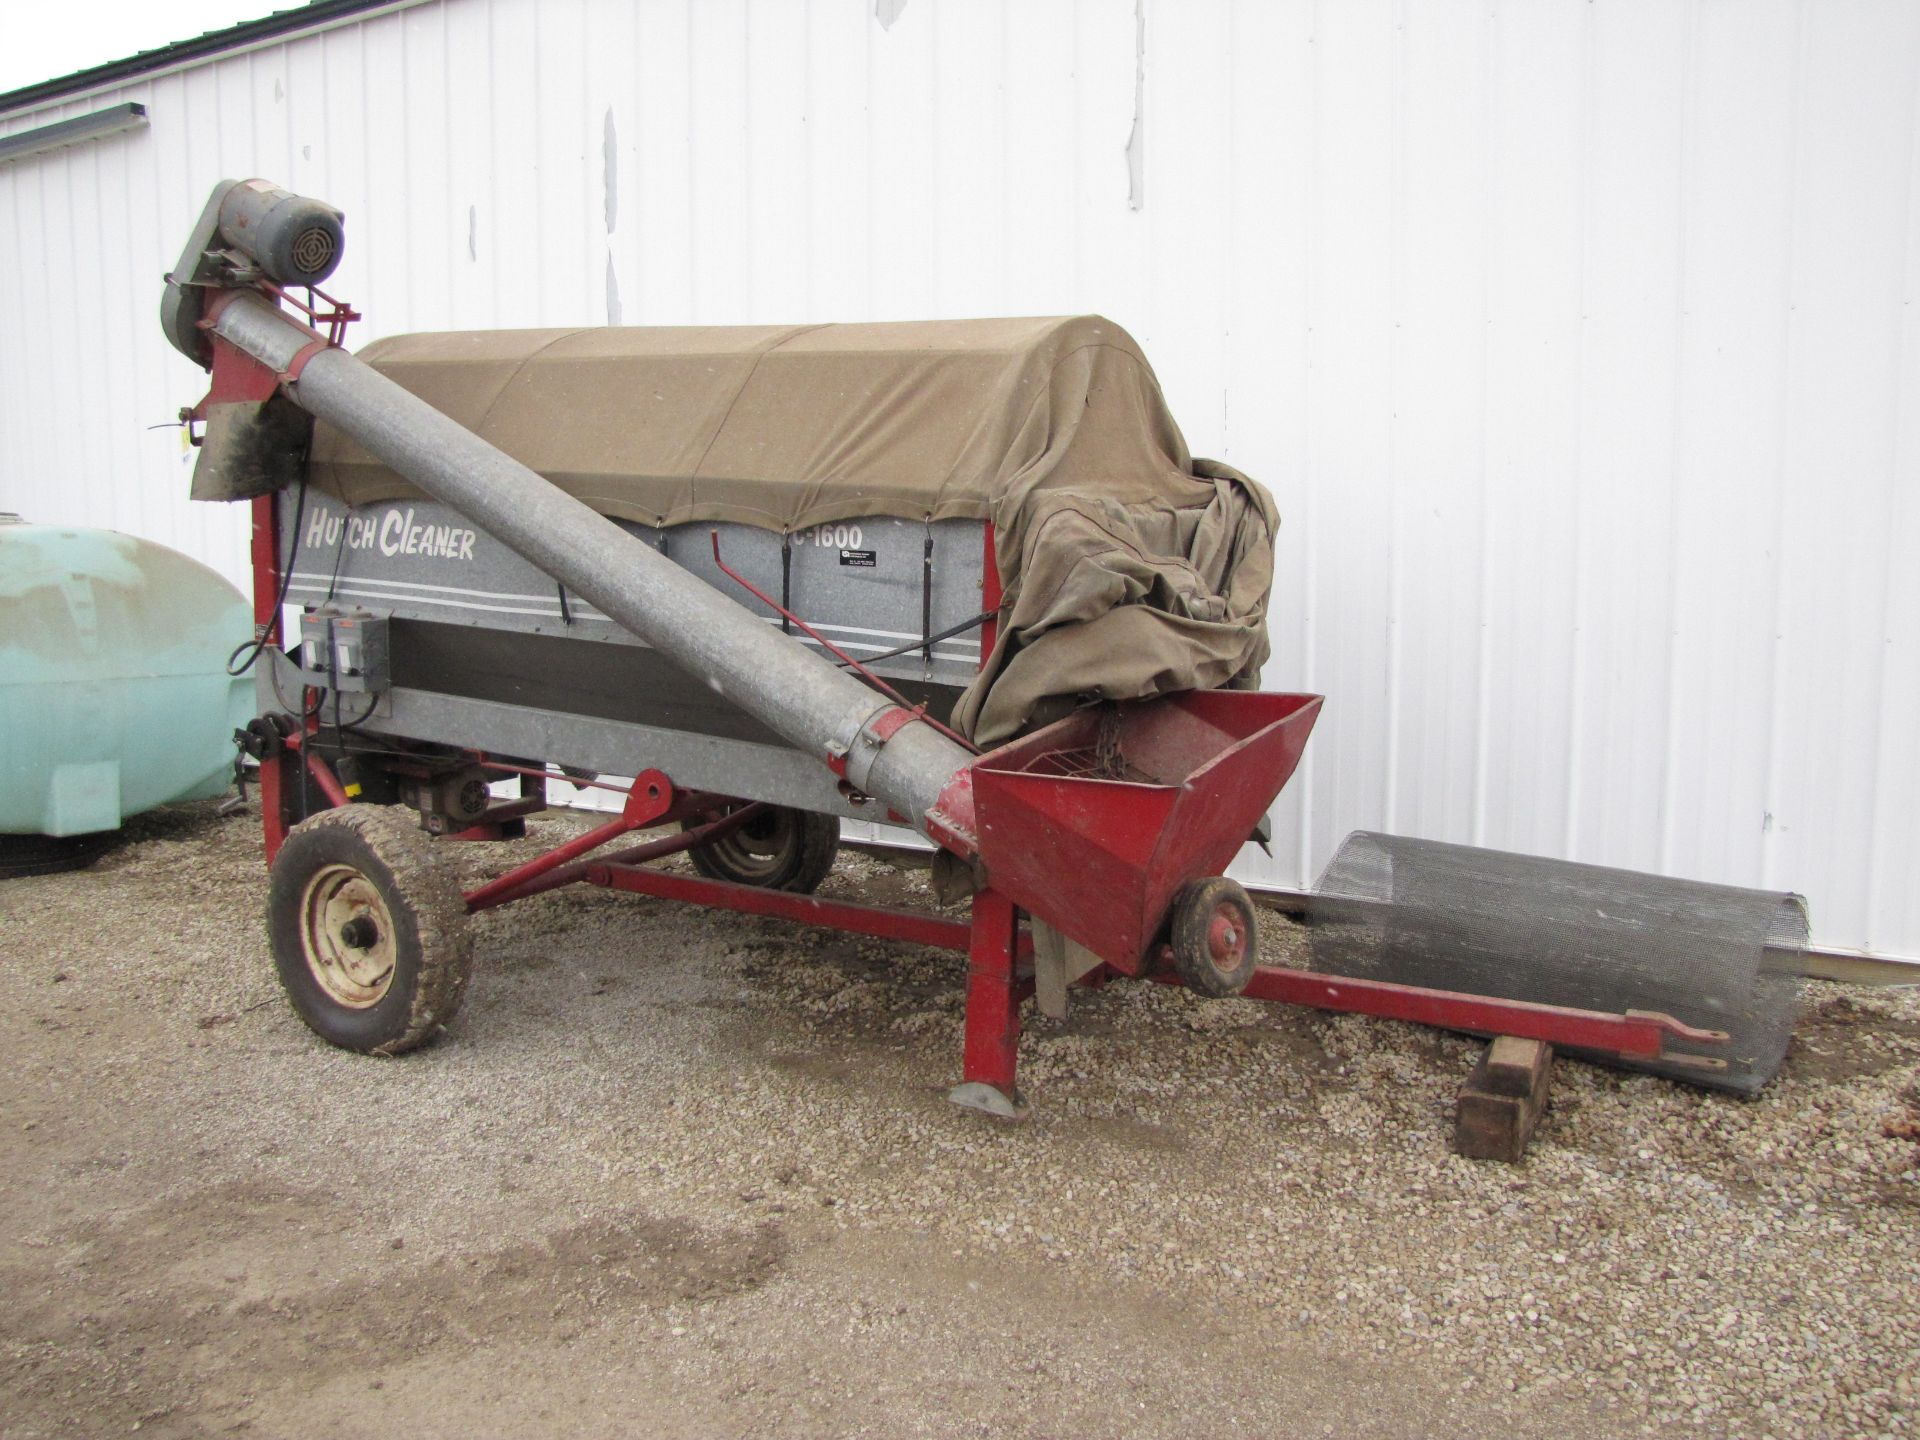 Hutch Cleaner C-1600 Grain Cleaner - Image 2 of 27